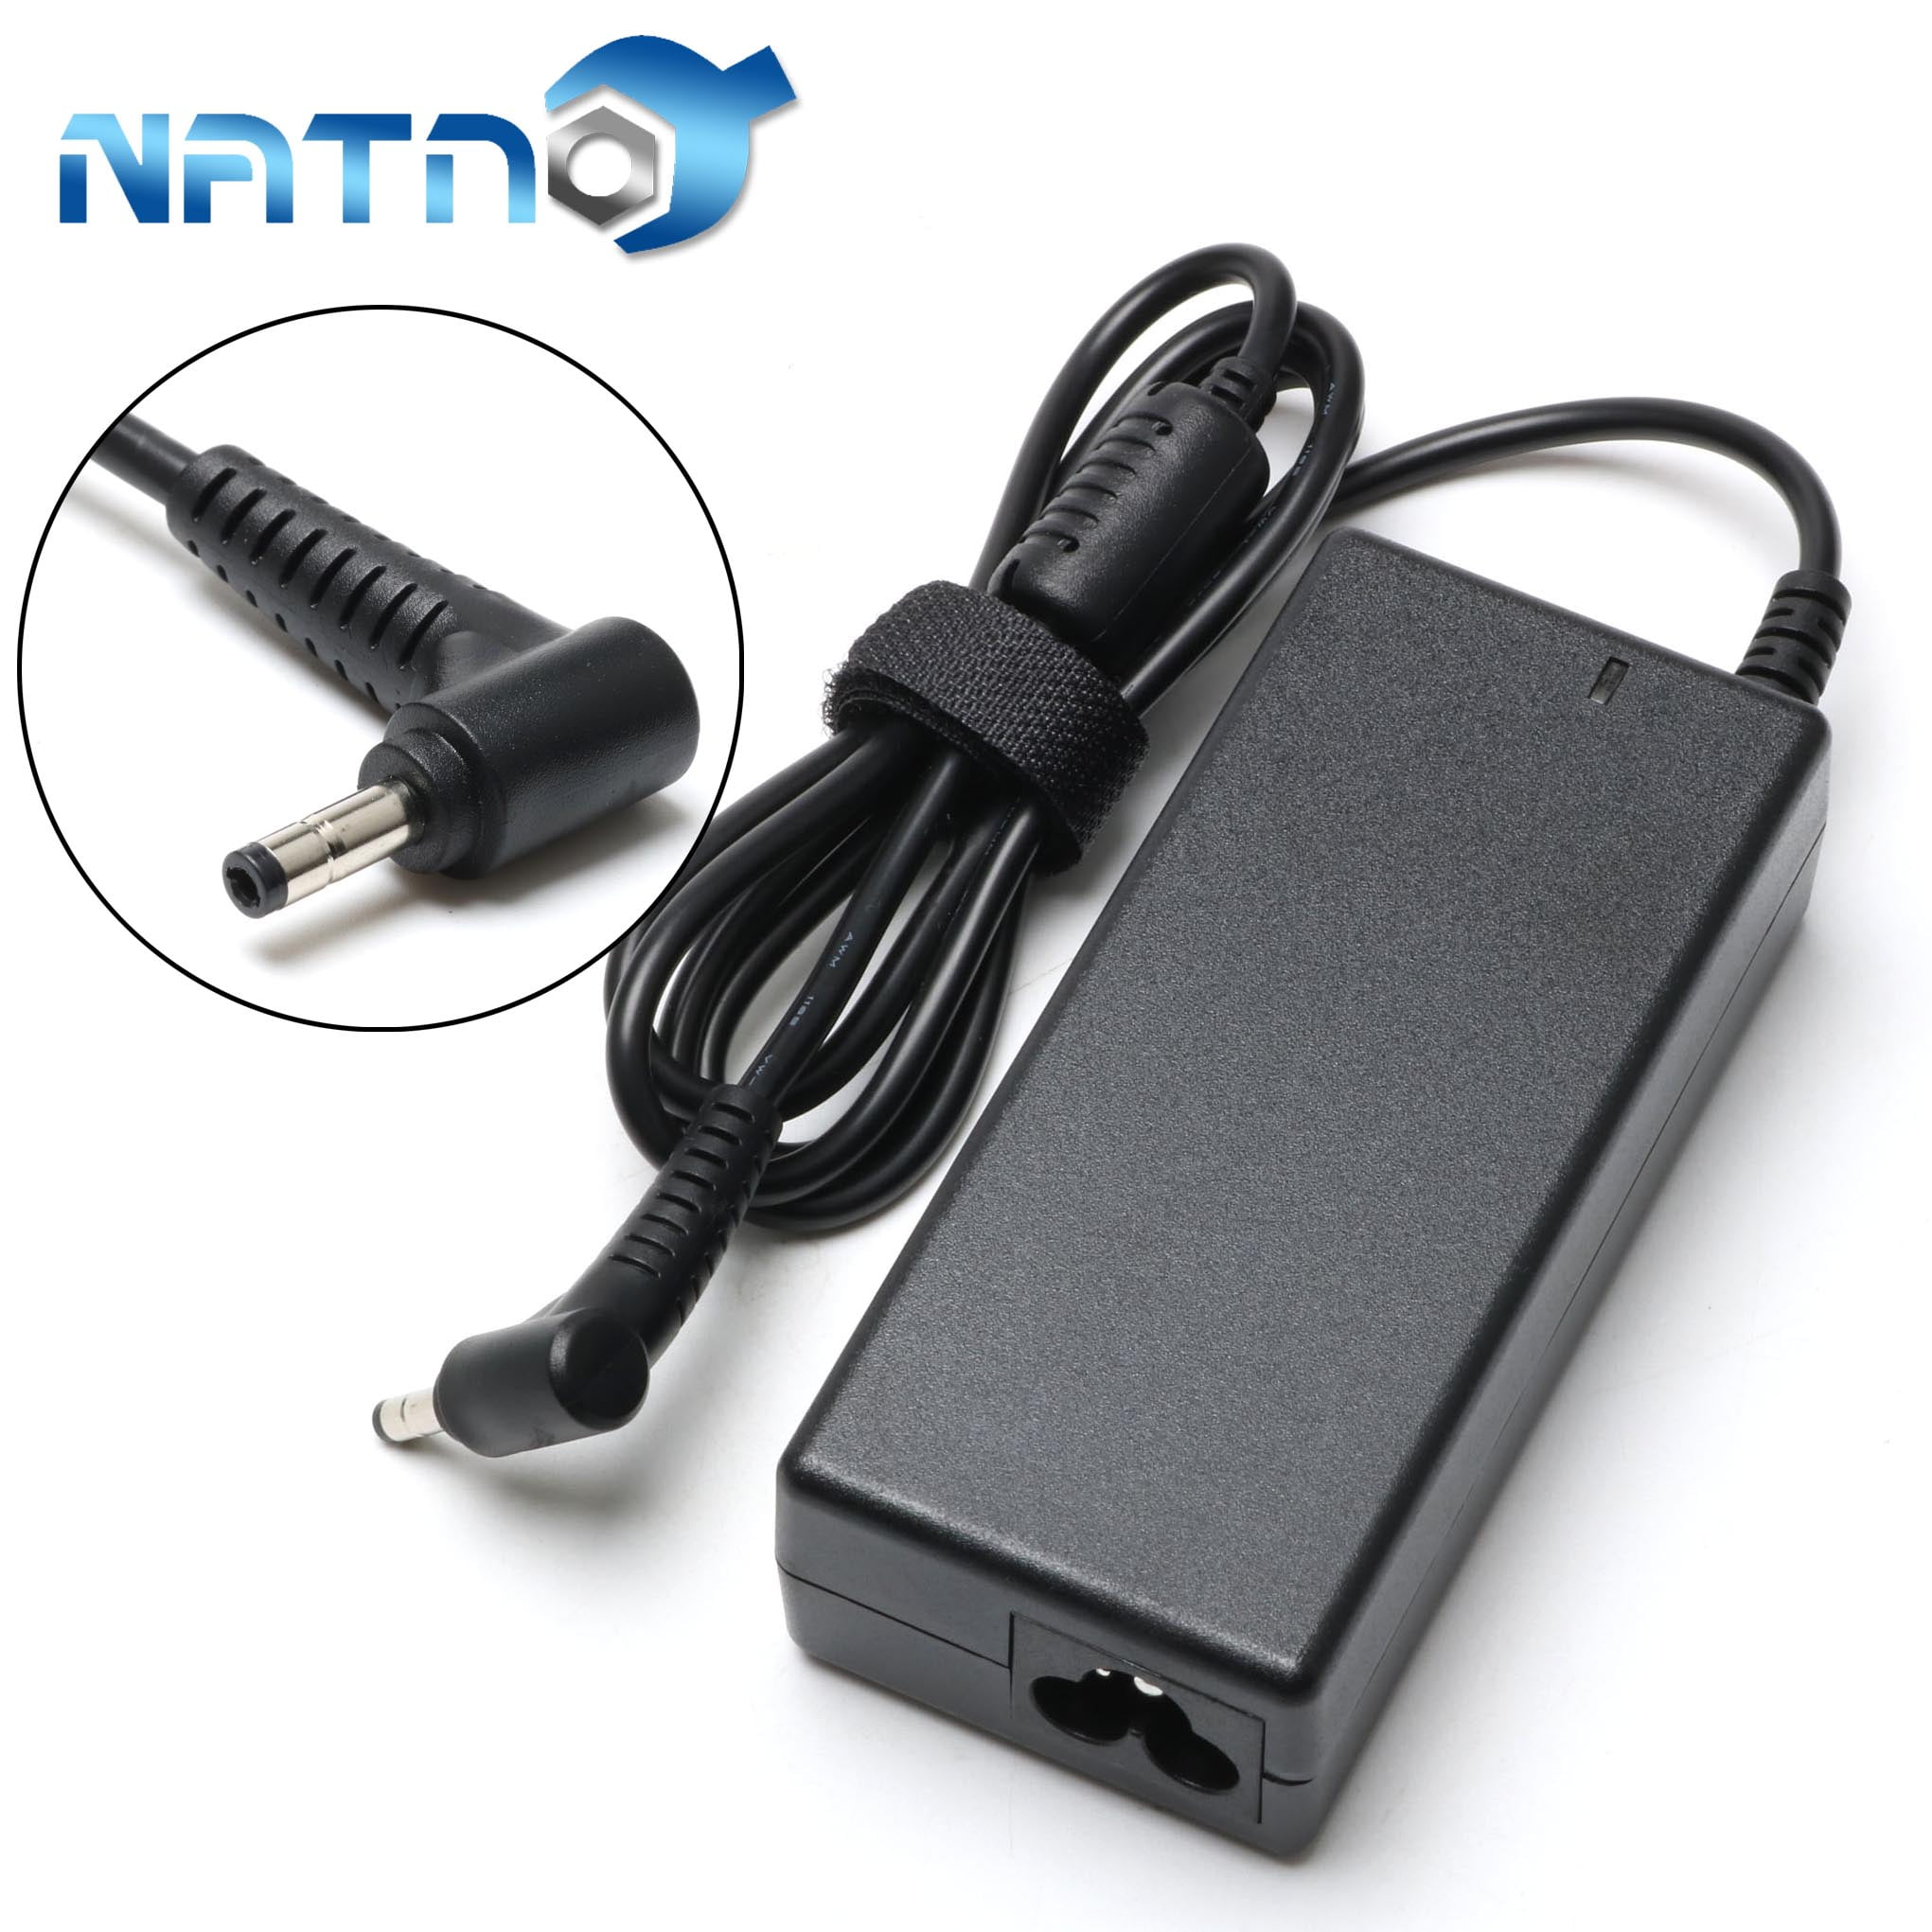 45W Laptop Charger for Lenovo IdeaPad S145 S540 S340 C340 S740 S145-14IGM  S145-15IGM S340-14IWL S340-14API S540-14IWL S540-15IWL C340-15IWL Touch Laptop  Power Cord Supply Adapter 